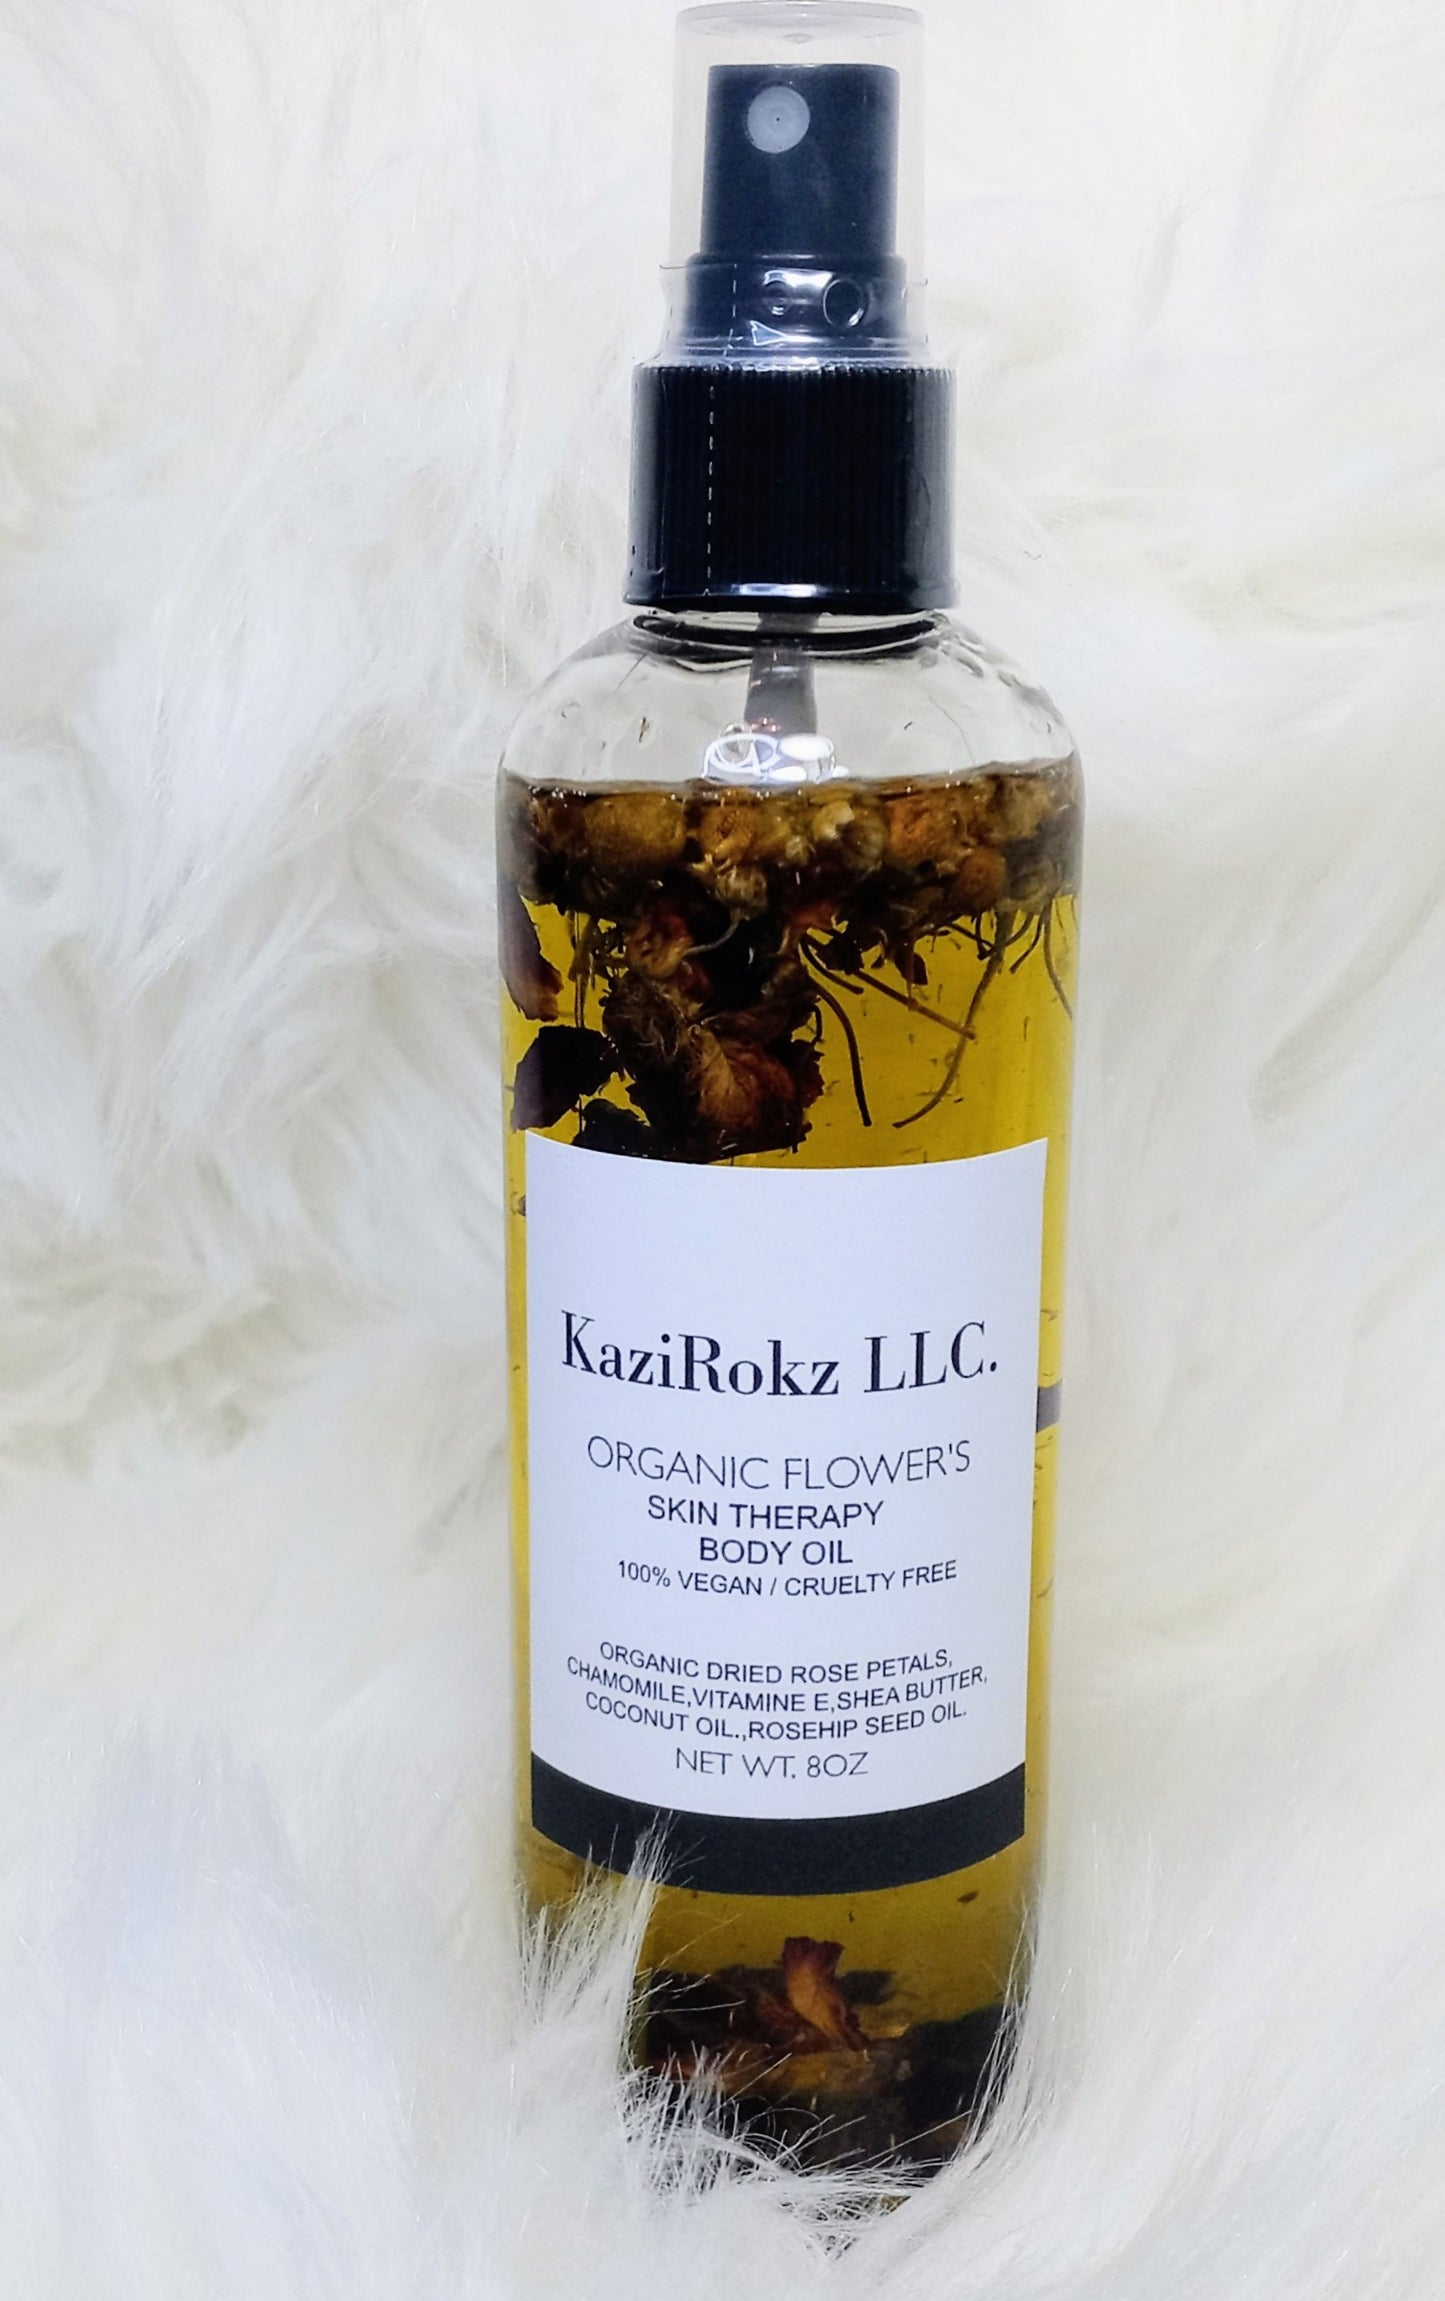 Organic Flowers Skin Therapy Body Oil soothing ECZEMA Body oil